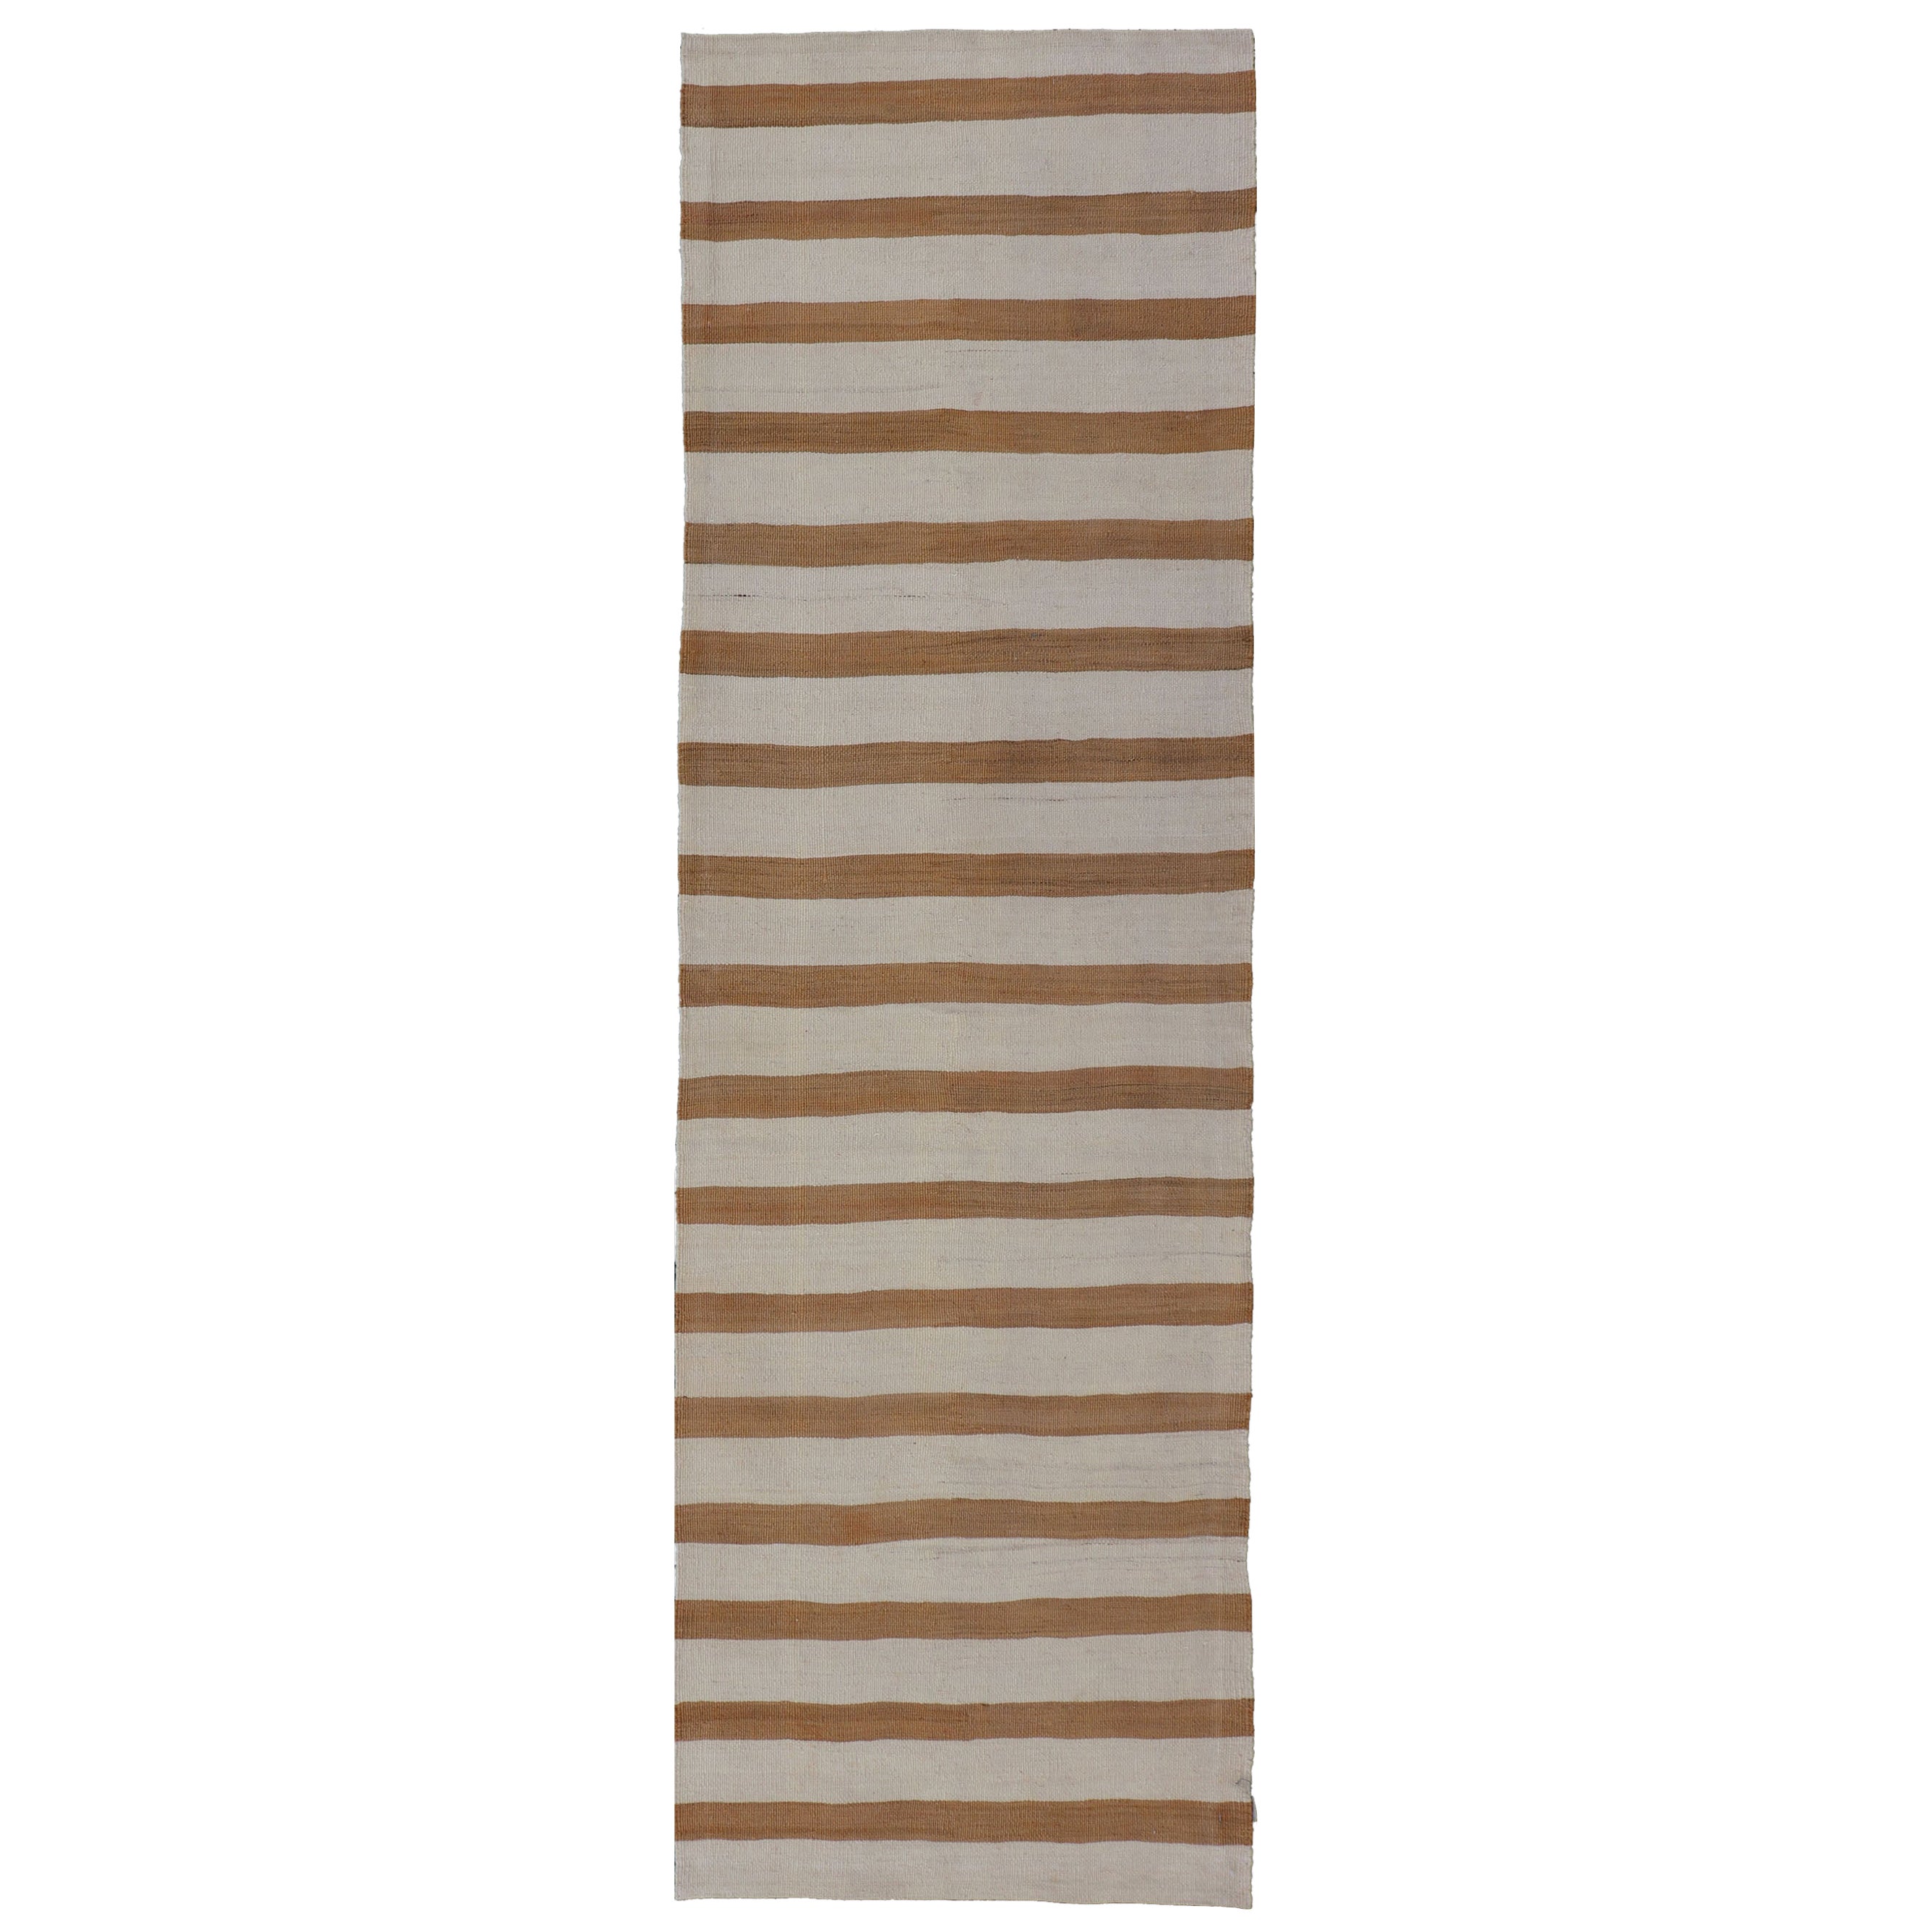 Vintage Turkish Kilim Rug with Horizontal Stripes in Light Brown and Cream For Sale